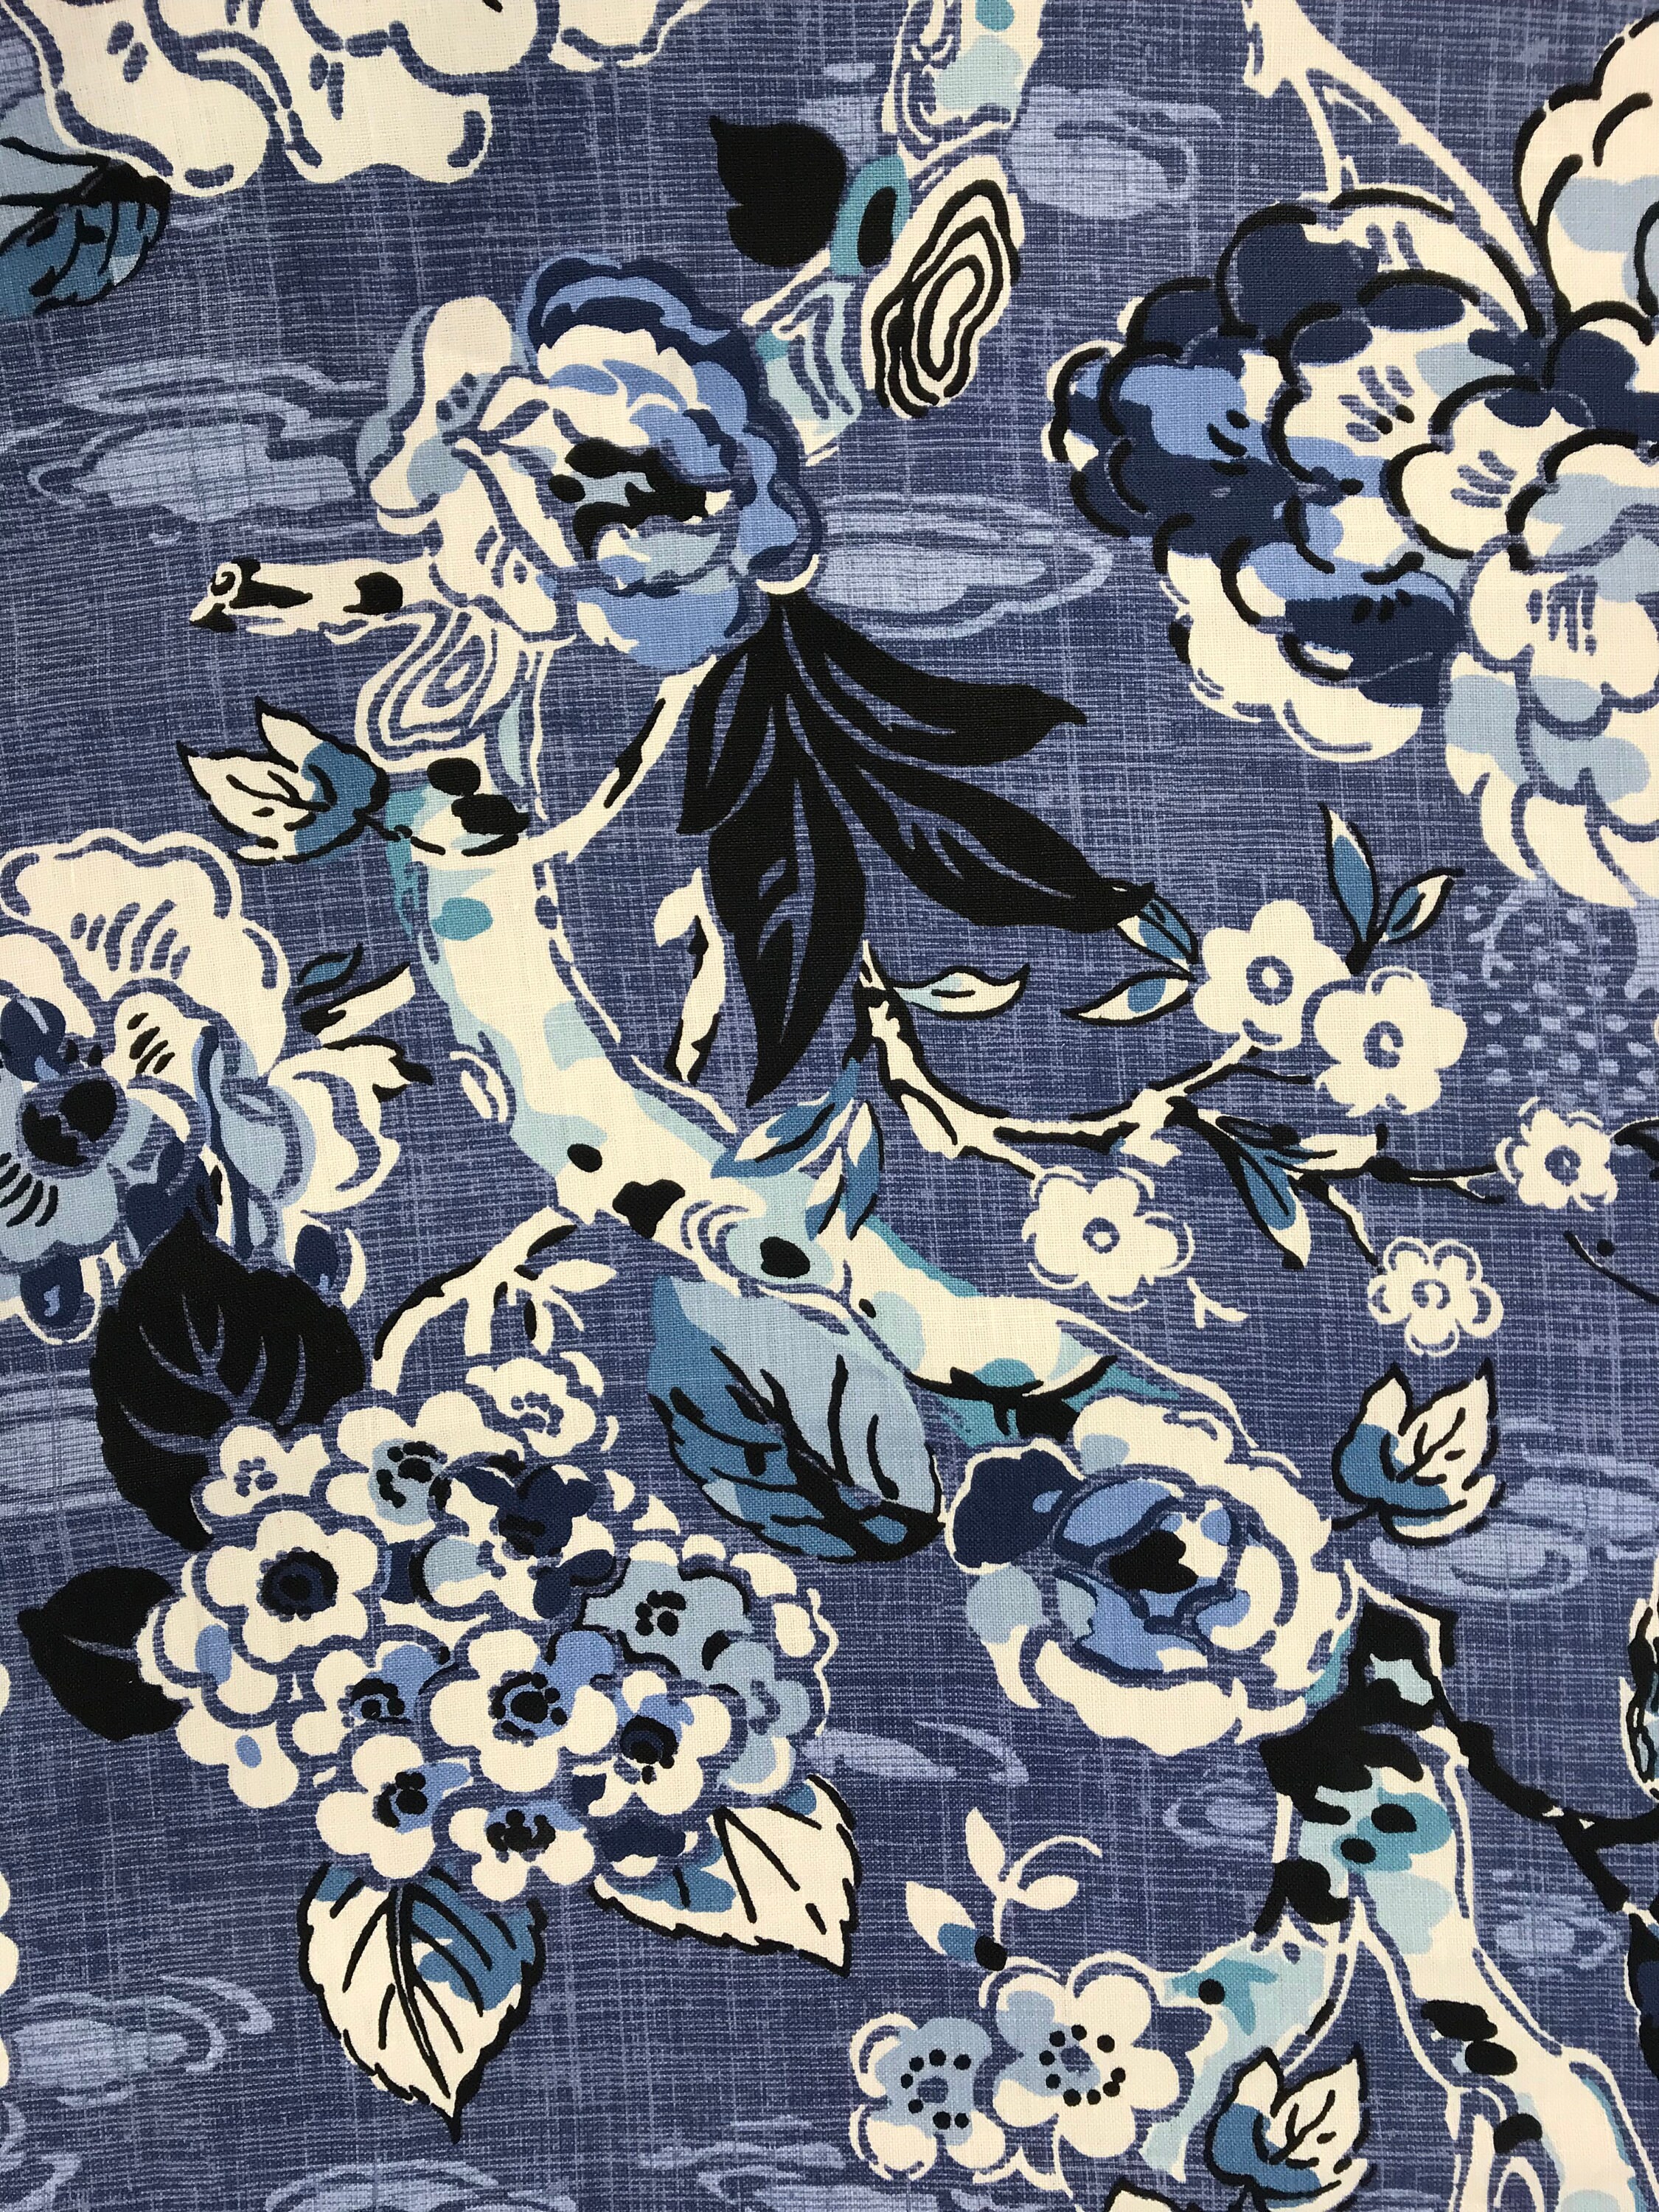 Navy Large Scale Jacobean Floral Modern Jacobean Drapery image picture